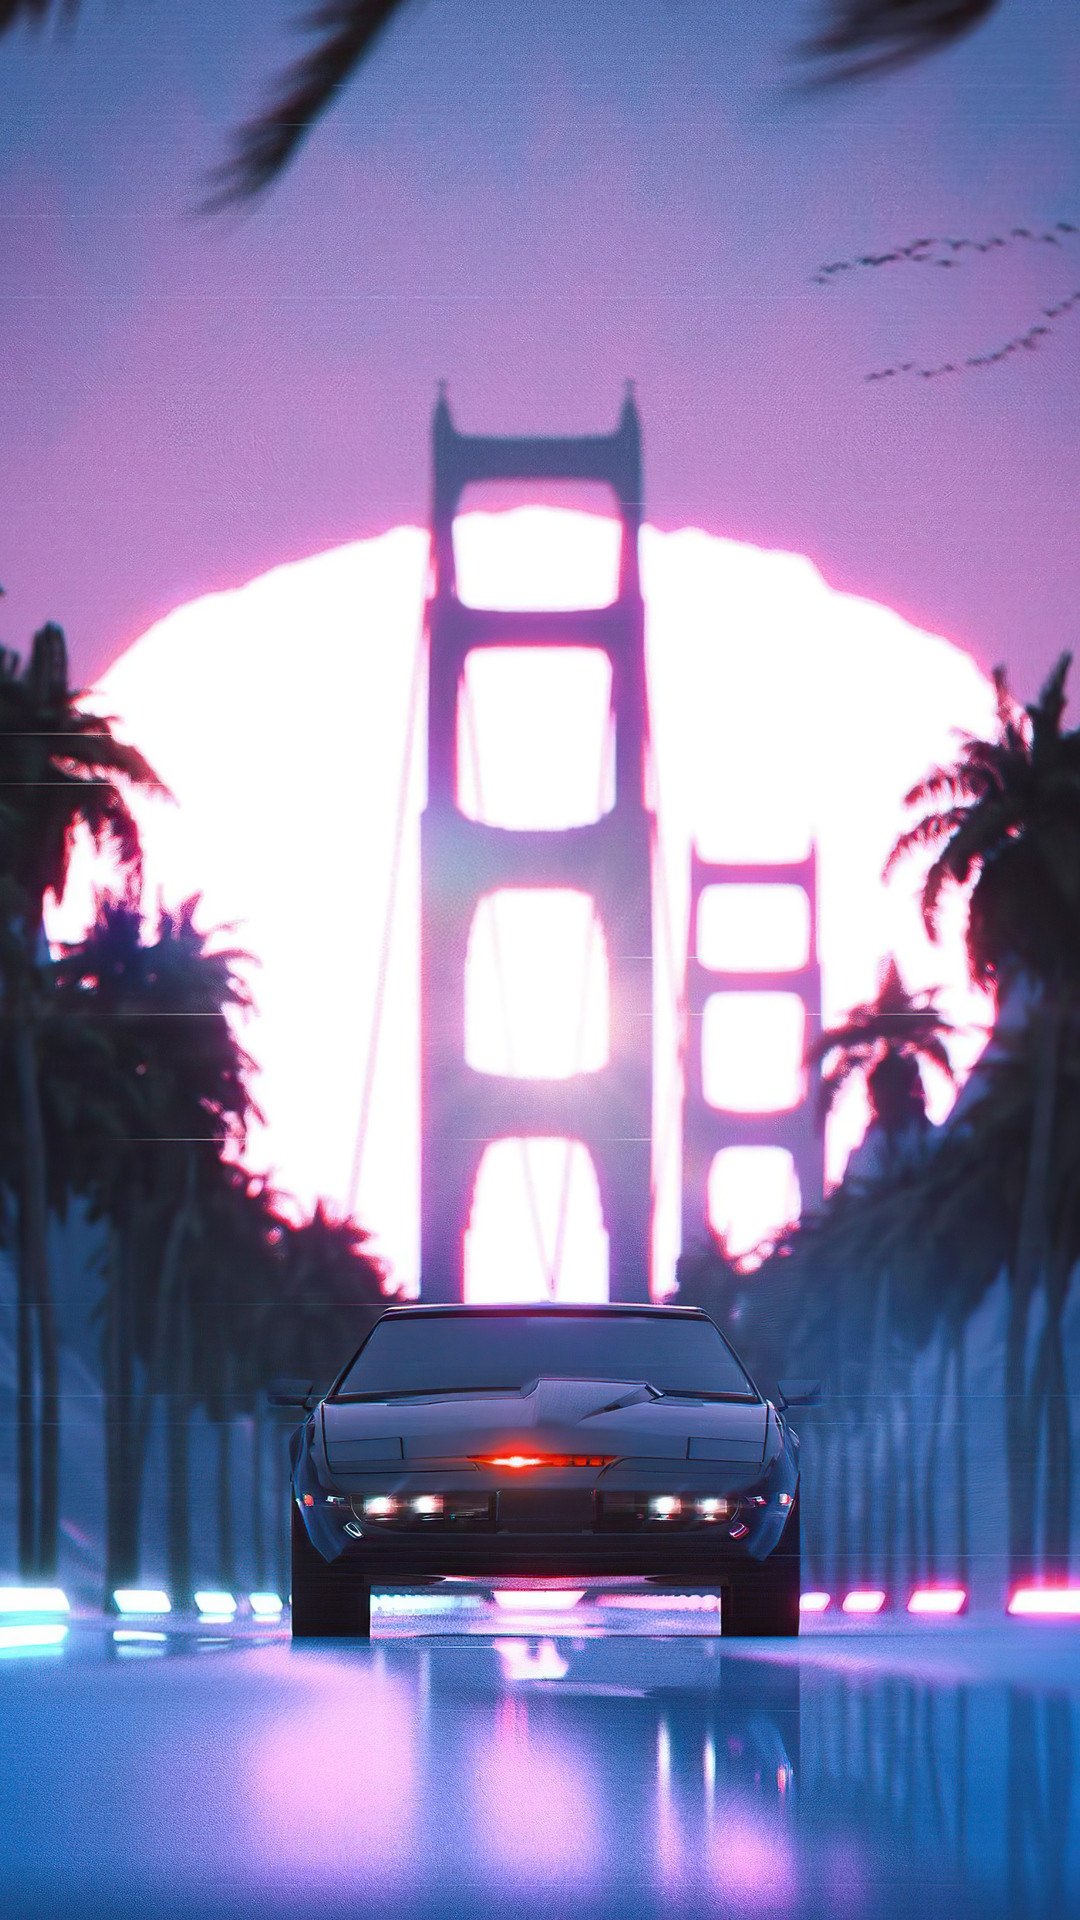 Black Knight Rider Car Vaporwave 5k iPhone 6s, 6 Plus, Pixel xl , One Plus 3t, 5 HD 4k Wallpaper, Image, Background, Photo and Picture